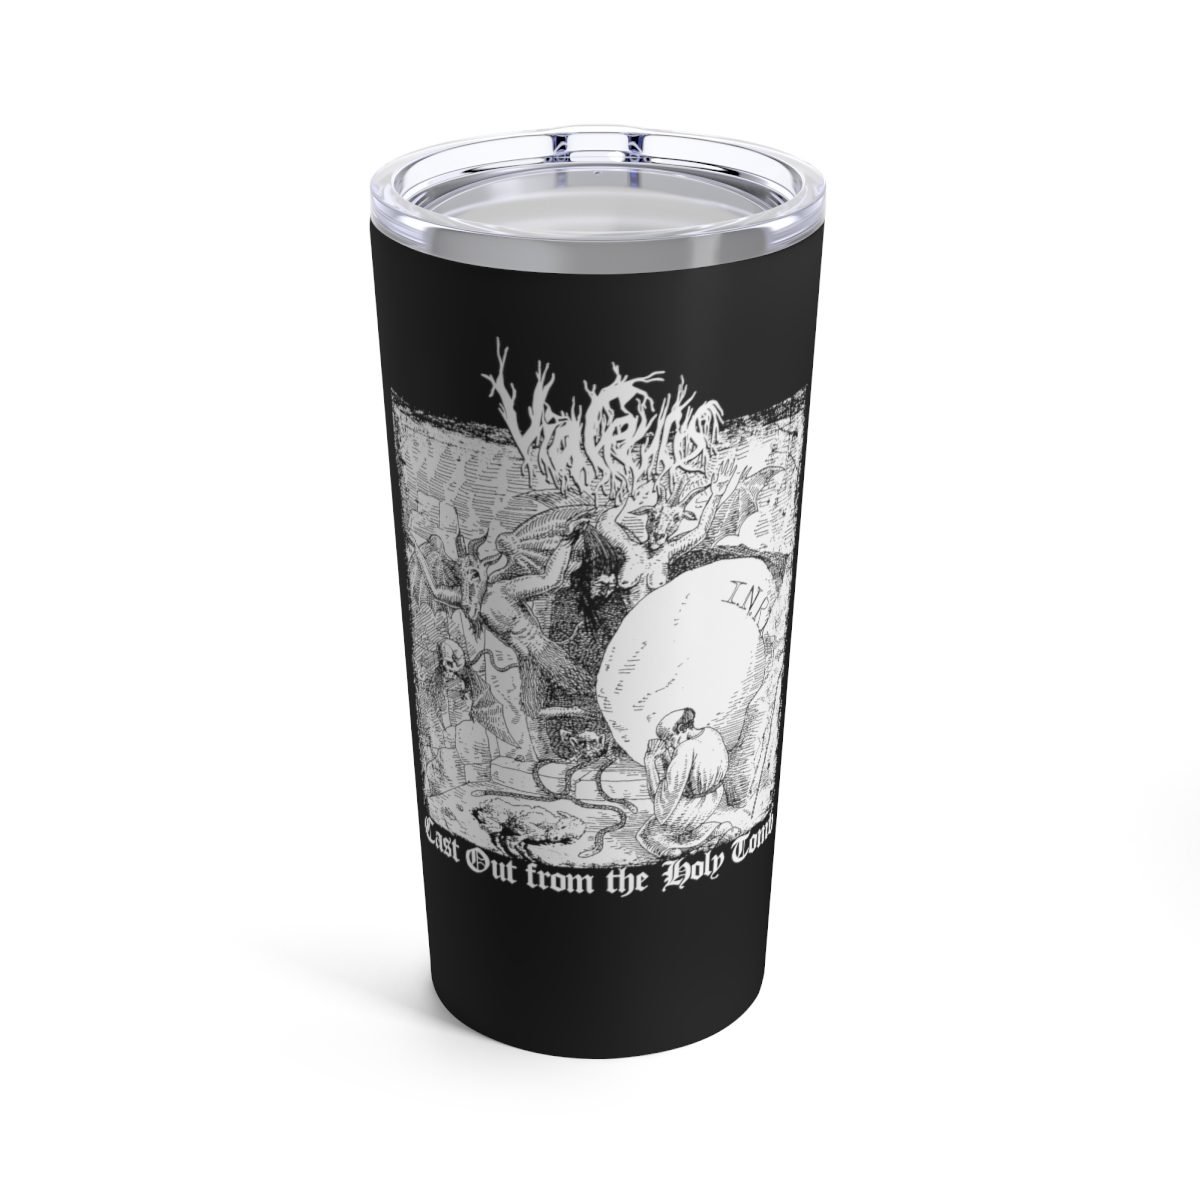 Via Crucis – Cast Out from the Holy Tomb 20oz Stainless Steel Tumbler